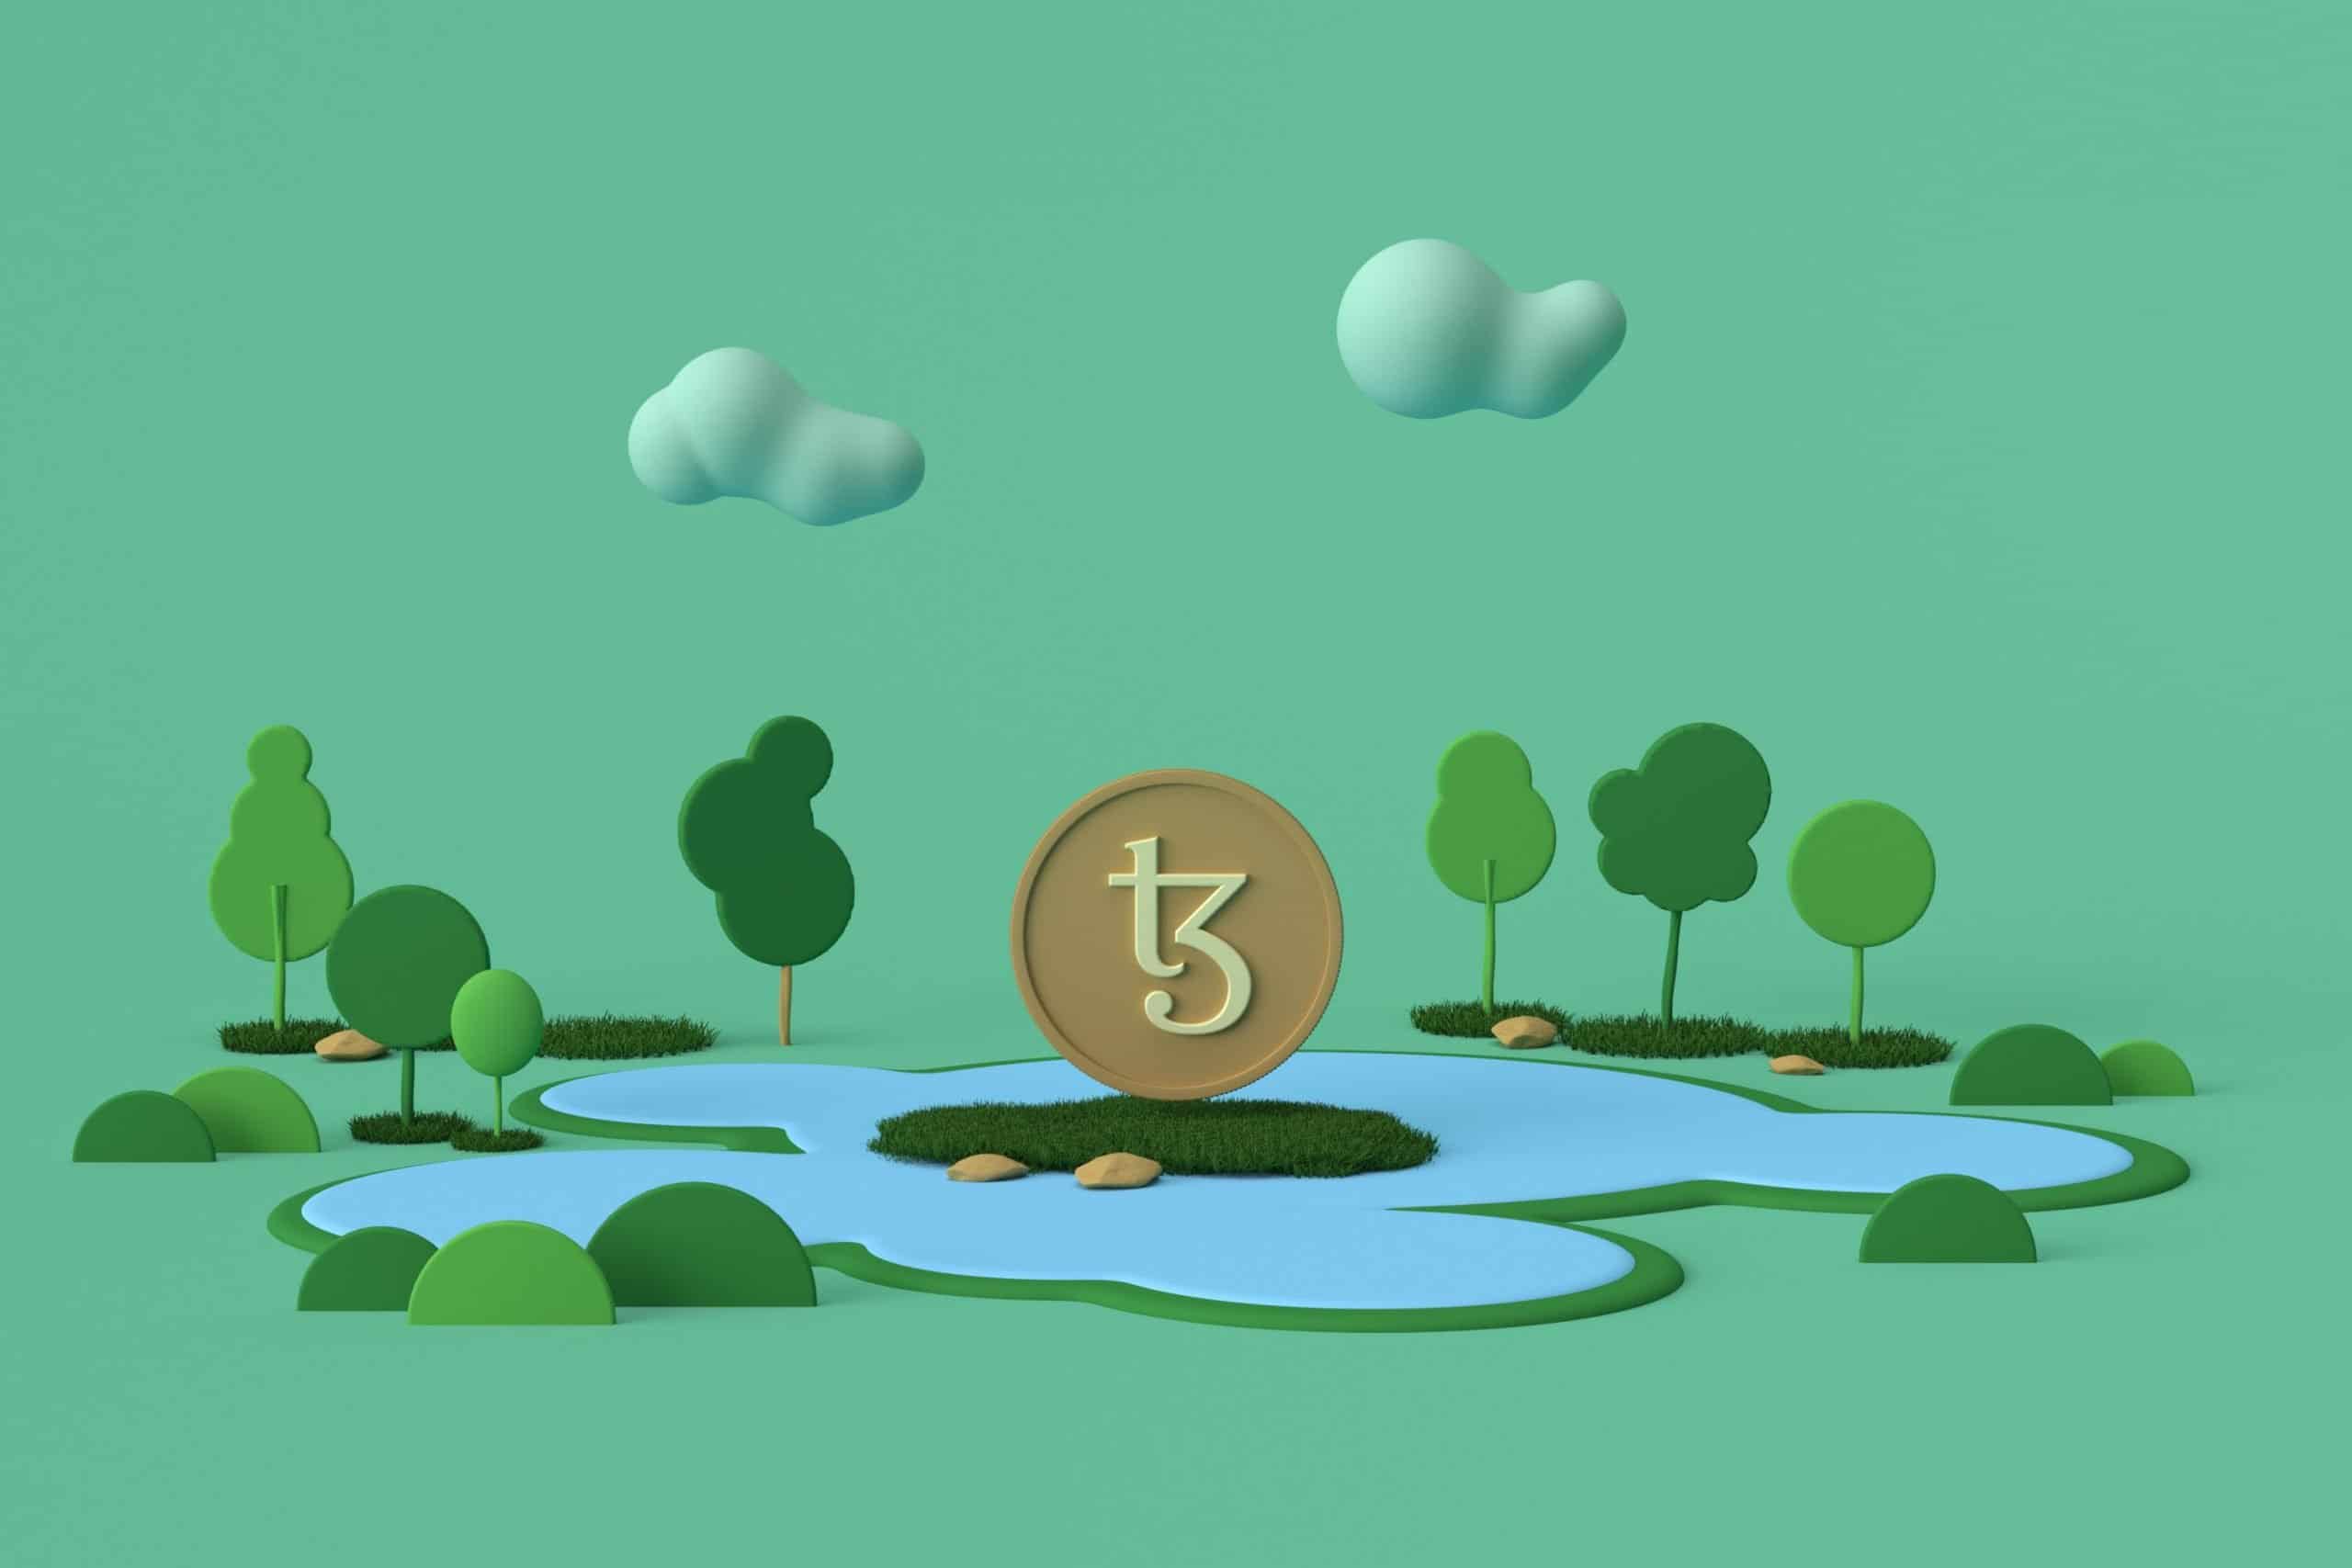 Tezos token surrounded by trees